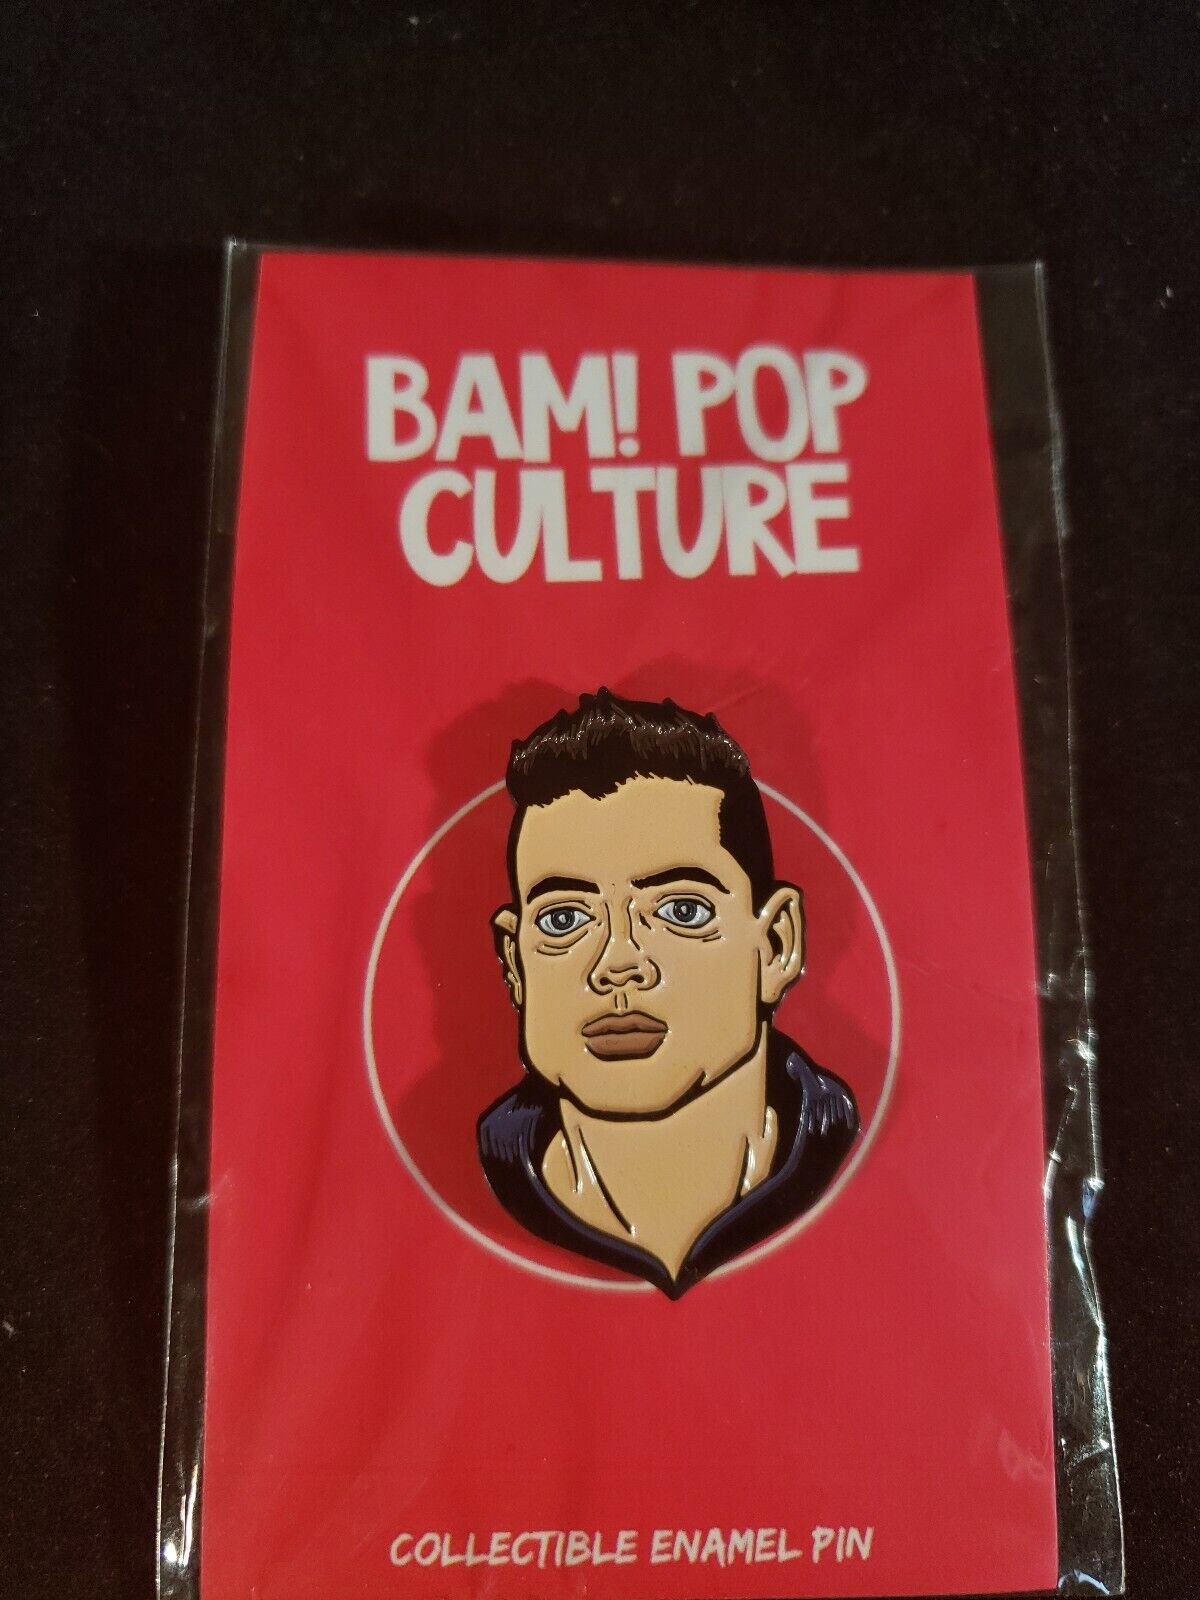 Mr. Robot Inspired Bam Pop Culture Pack 1 1/2 inch Pin Variant